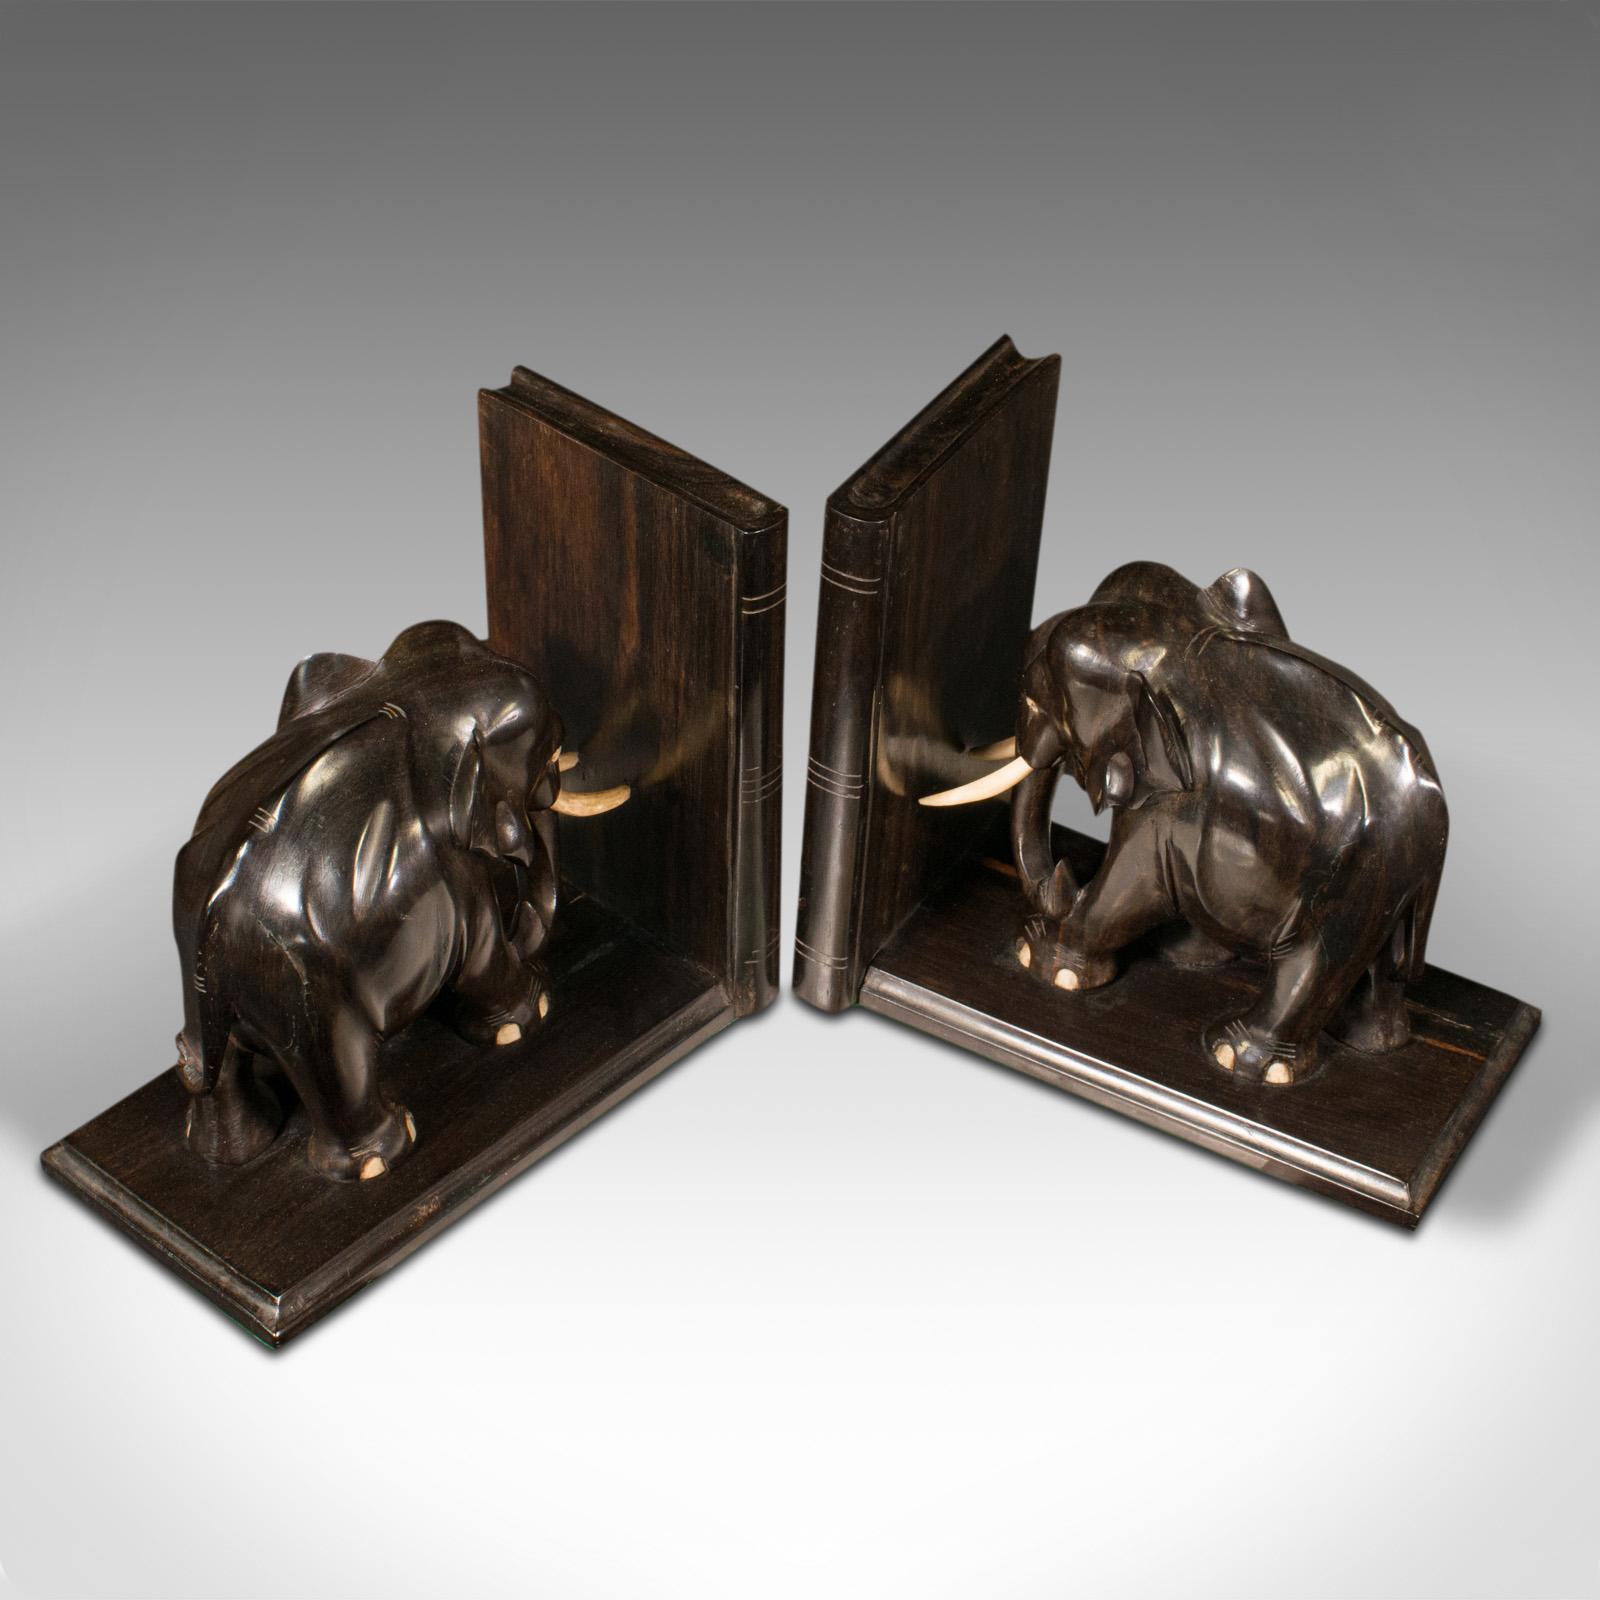 British Pair of Antique Elephant Bookends, Anglo Indian, Ebony, Decorative, Book Rest For Sale